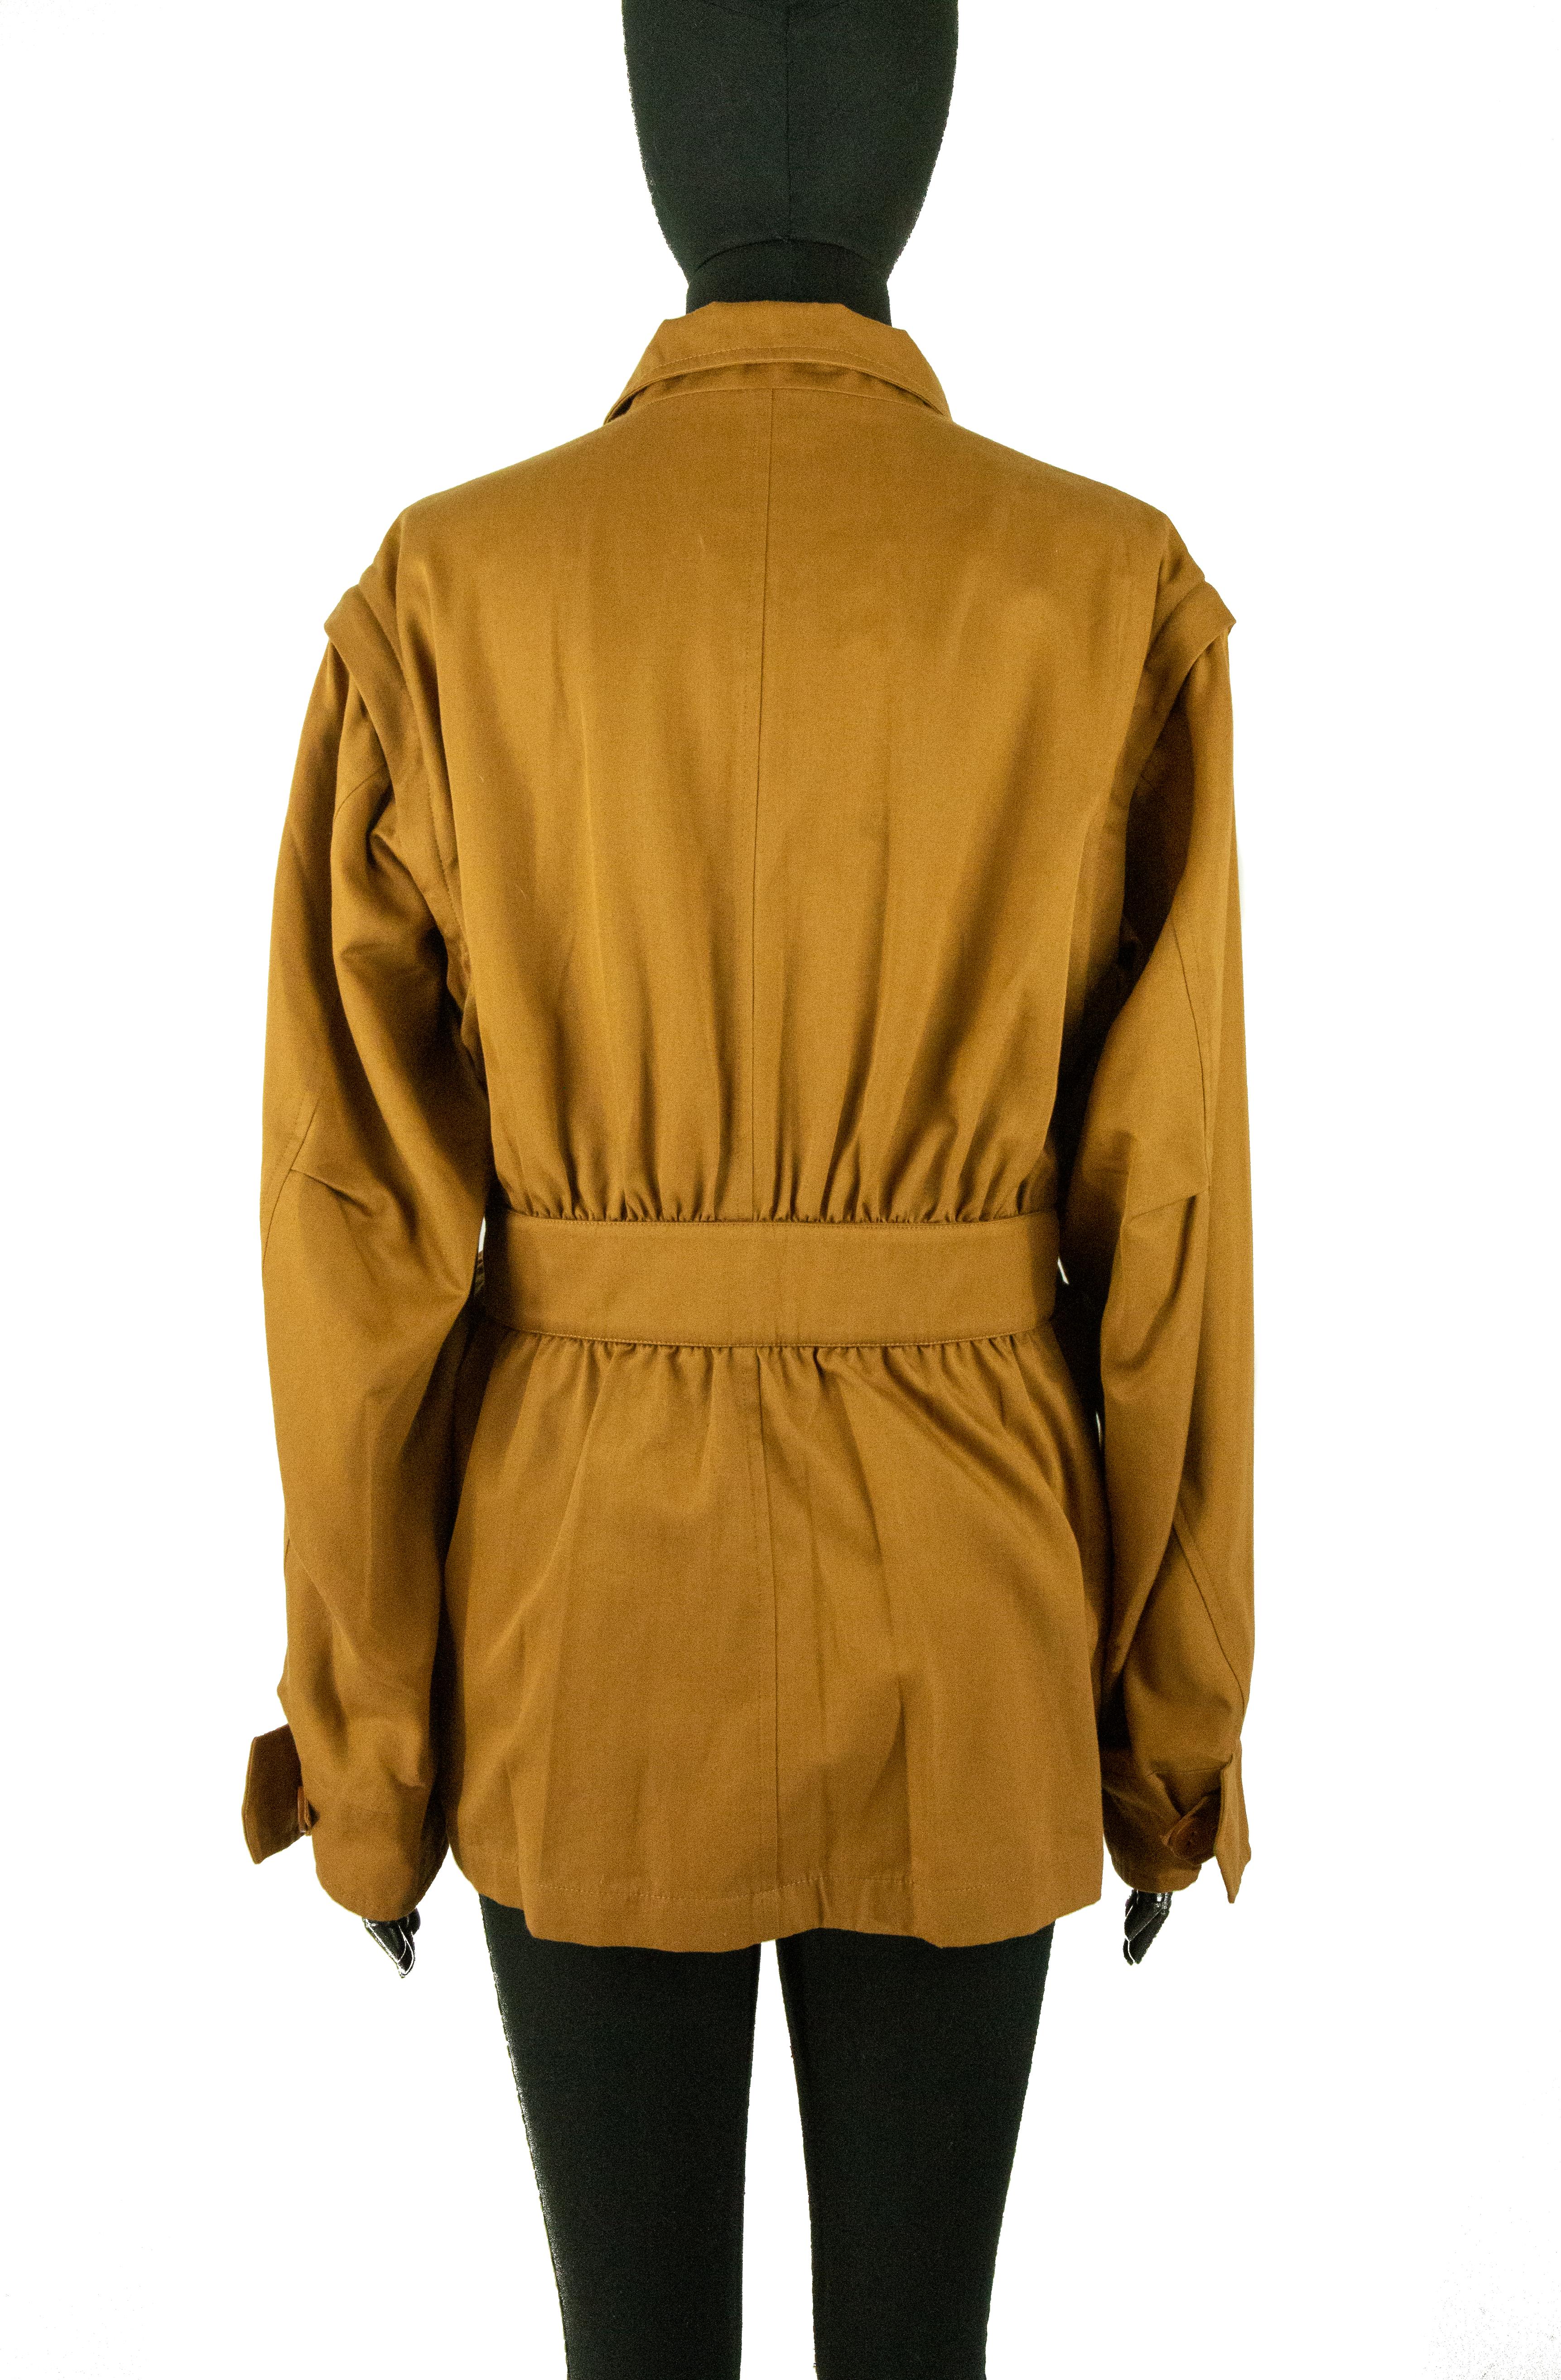 Brown Tan Hermes Jacket With Detachable Sleeves For Sale